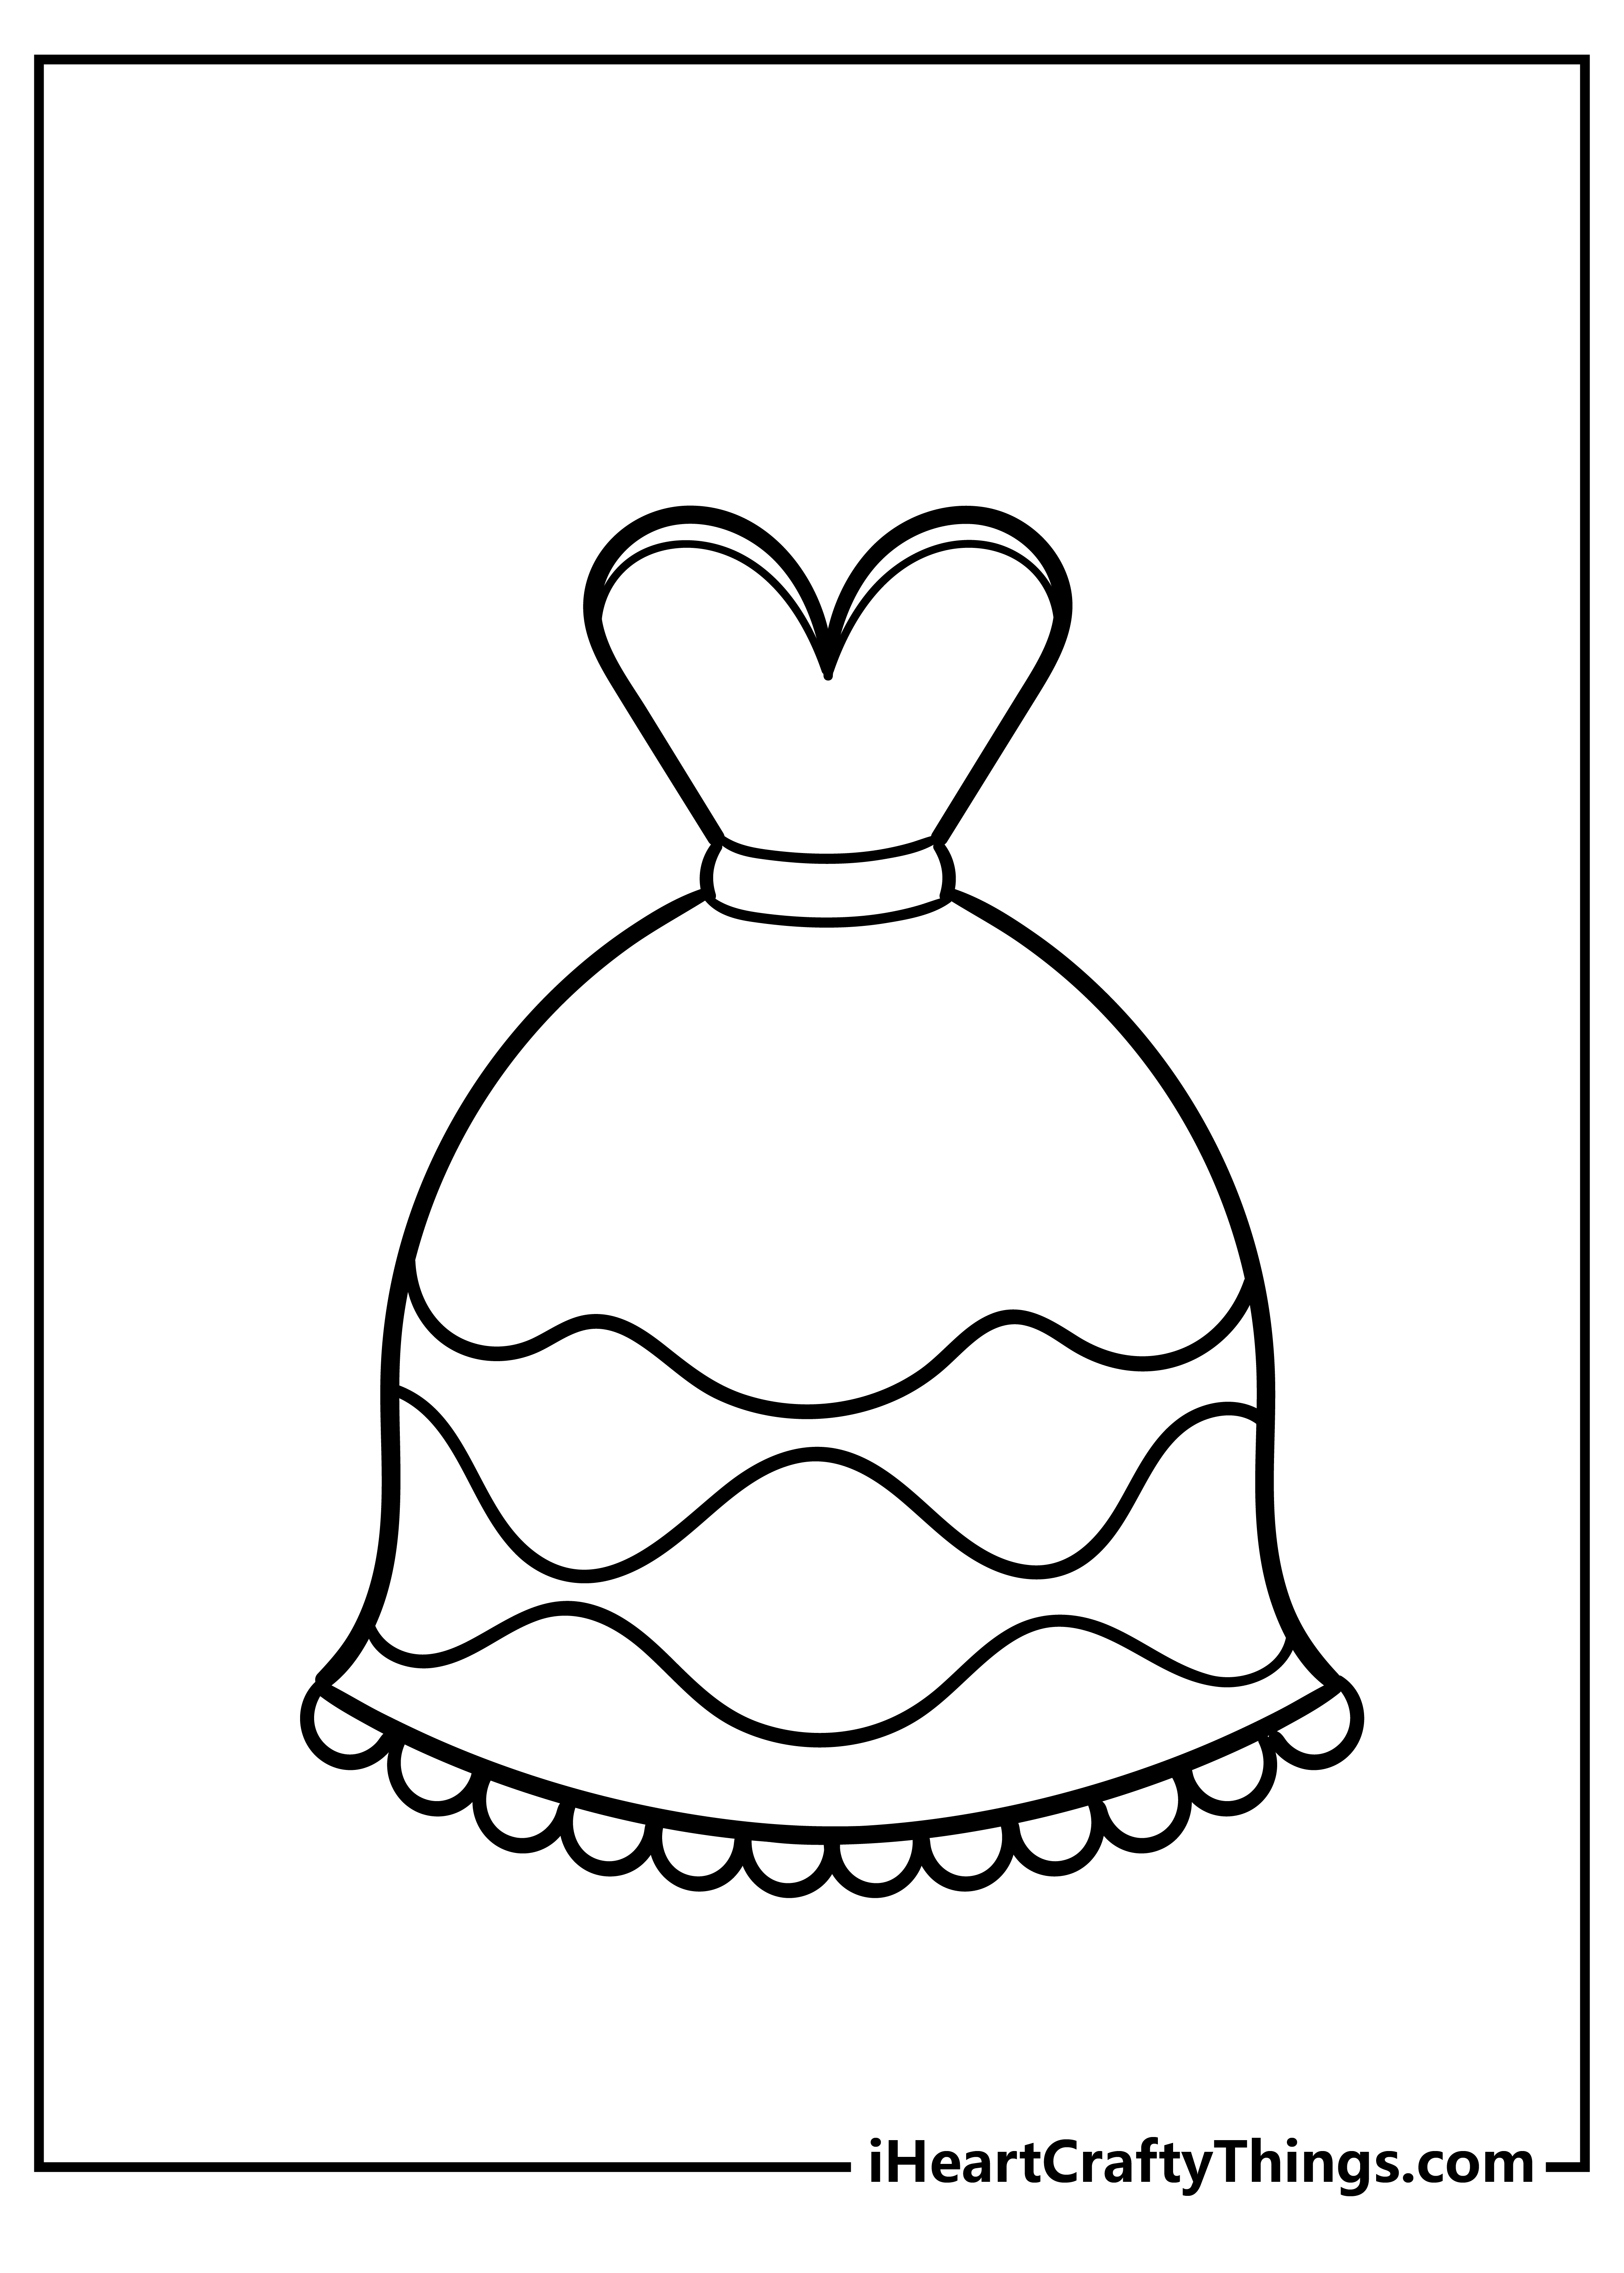 Dress Coloring Pages for adults free printable